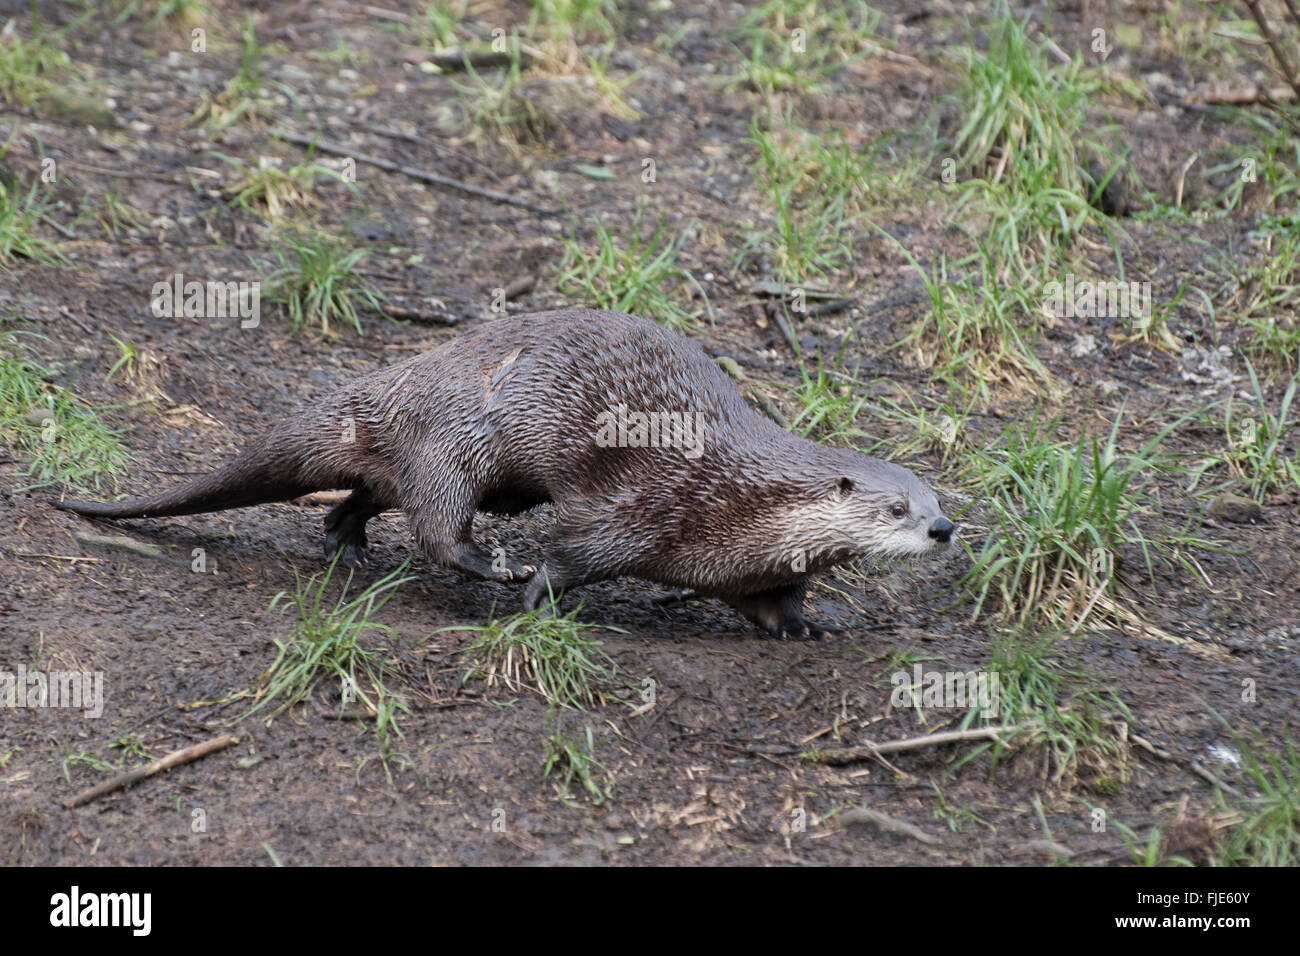 North American river otter (Lontra canadensis) Stock Photo